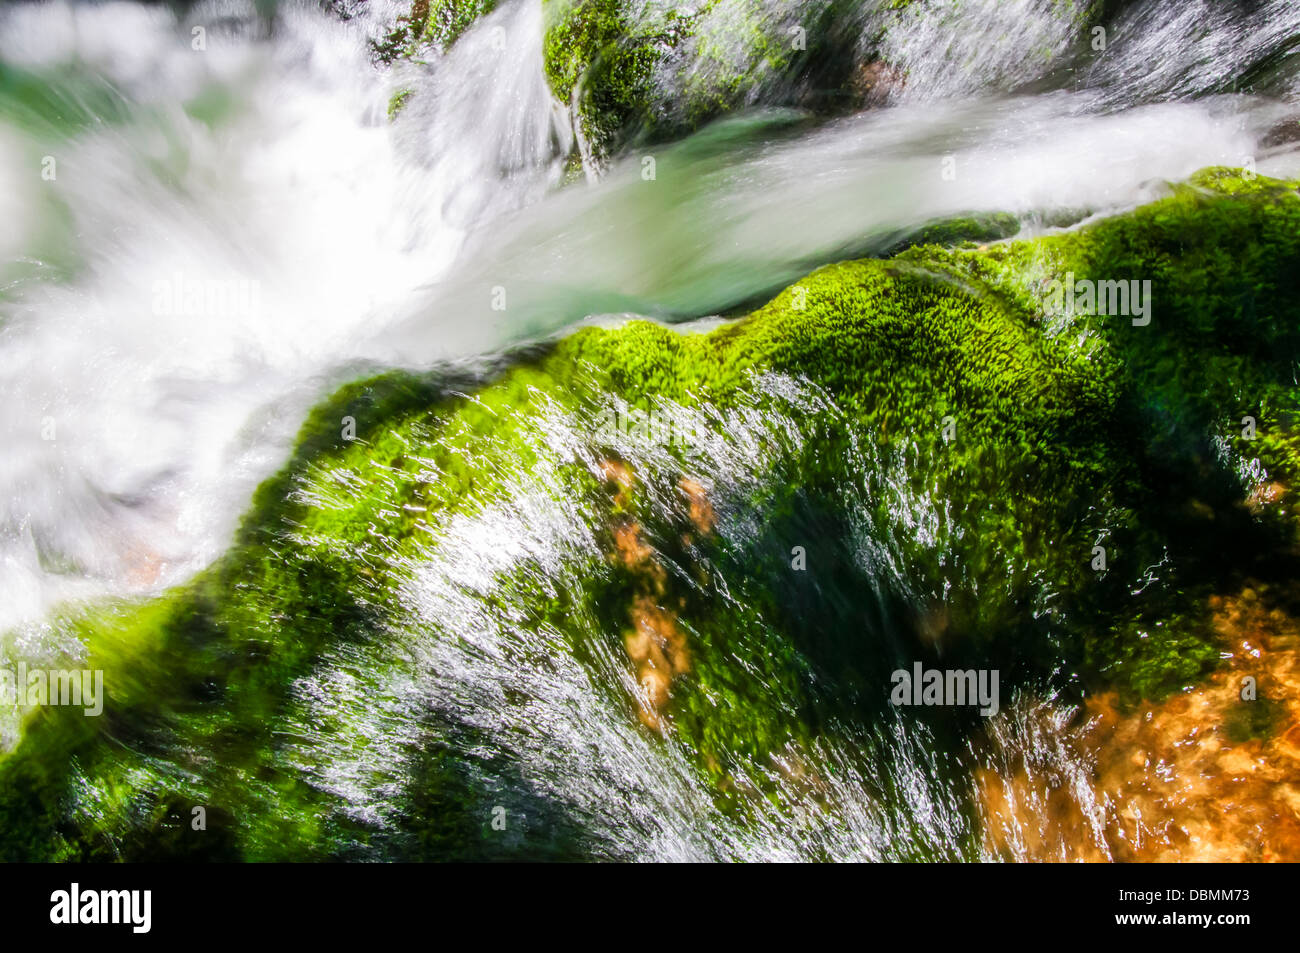 Crystal clear water flowing over green mossy rocks Stock Photo